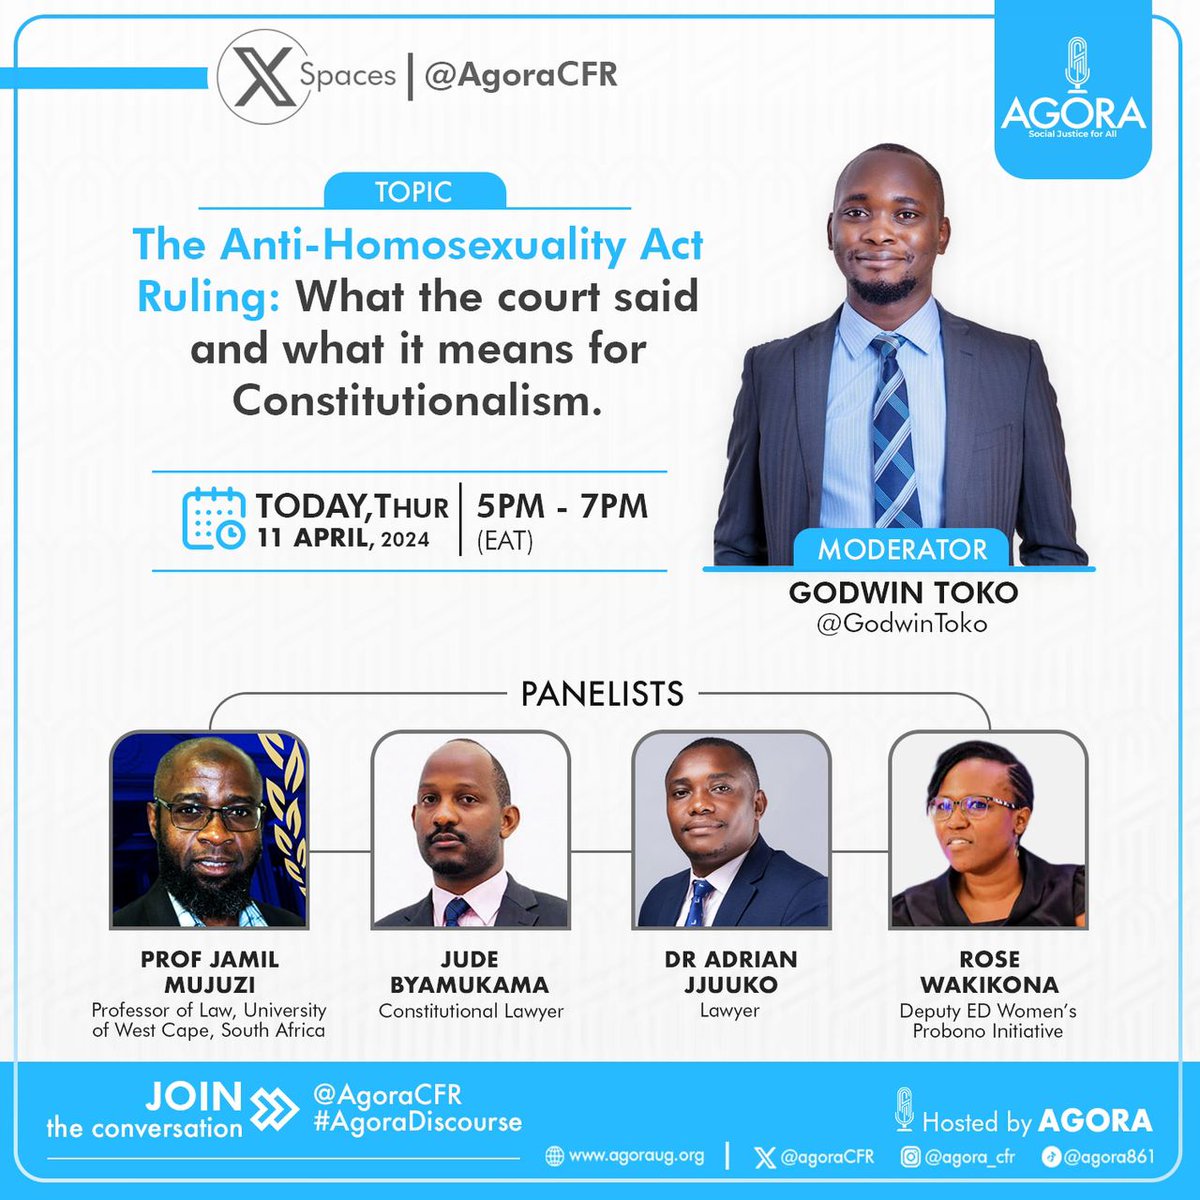 Dr. Adrian Jjuuko will be part of a discussion on the implications of the judgement in the constitutional petitions that challenged the Anti-Homosexuality Act 2023 and its impact on constitutionalism The discussion will be hosted by @AgoraCFR at 5:00PM EAT